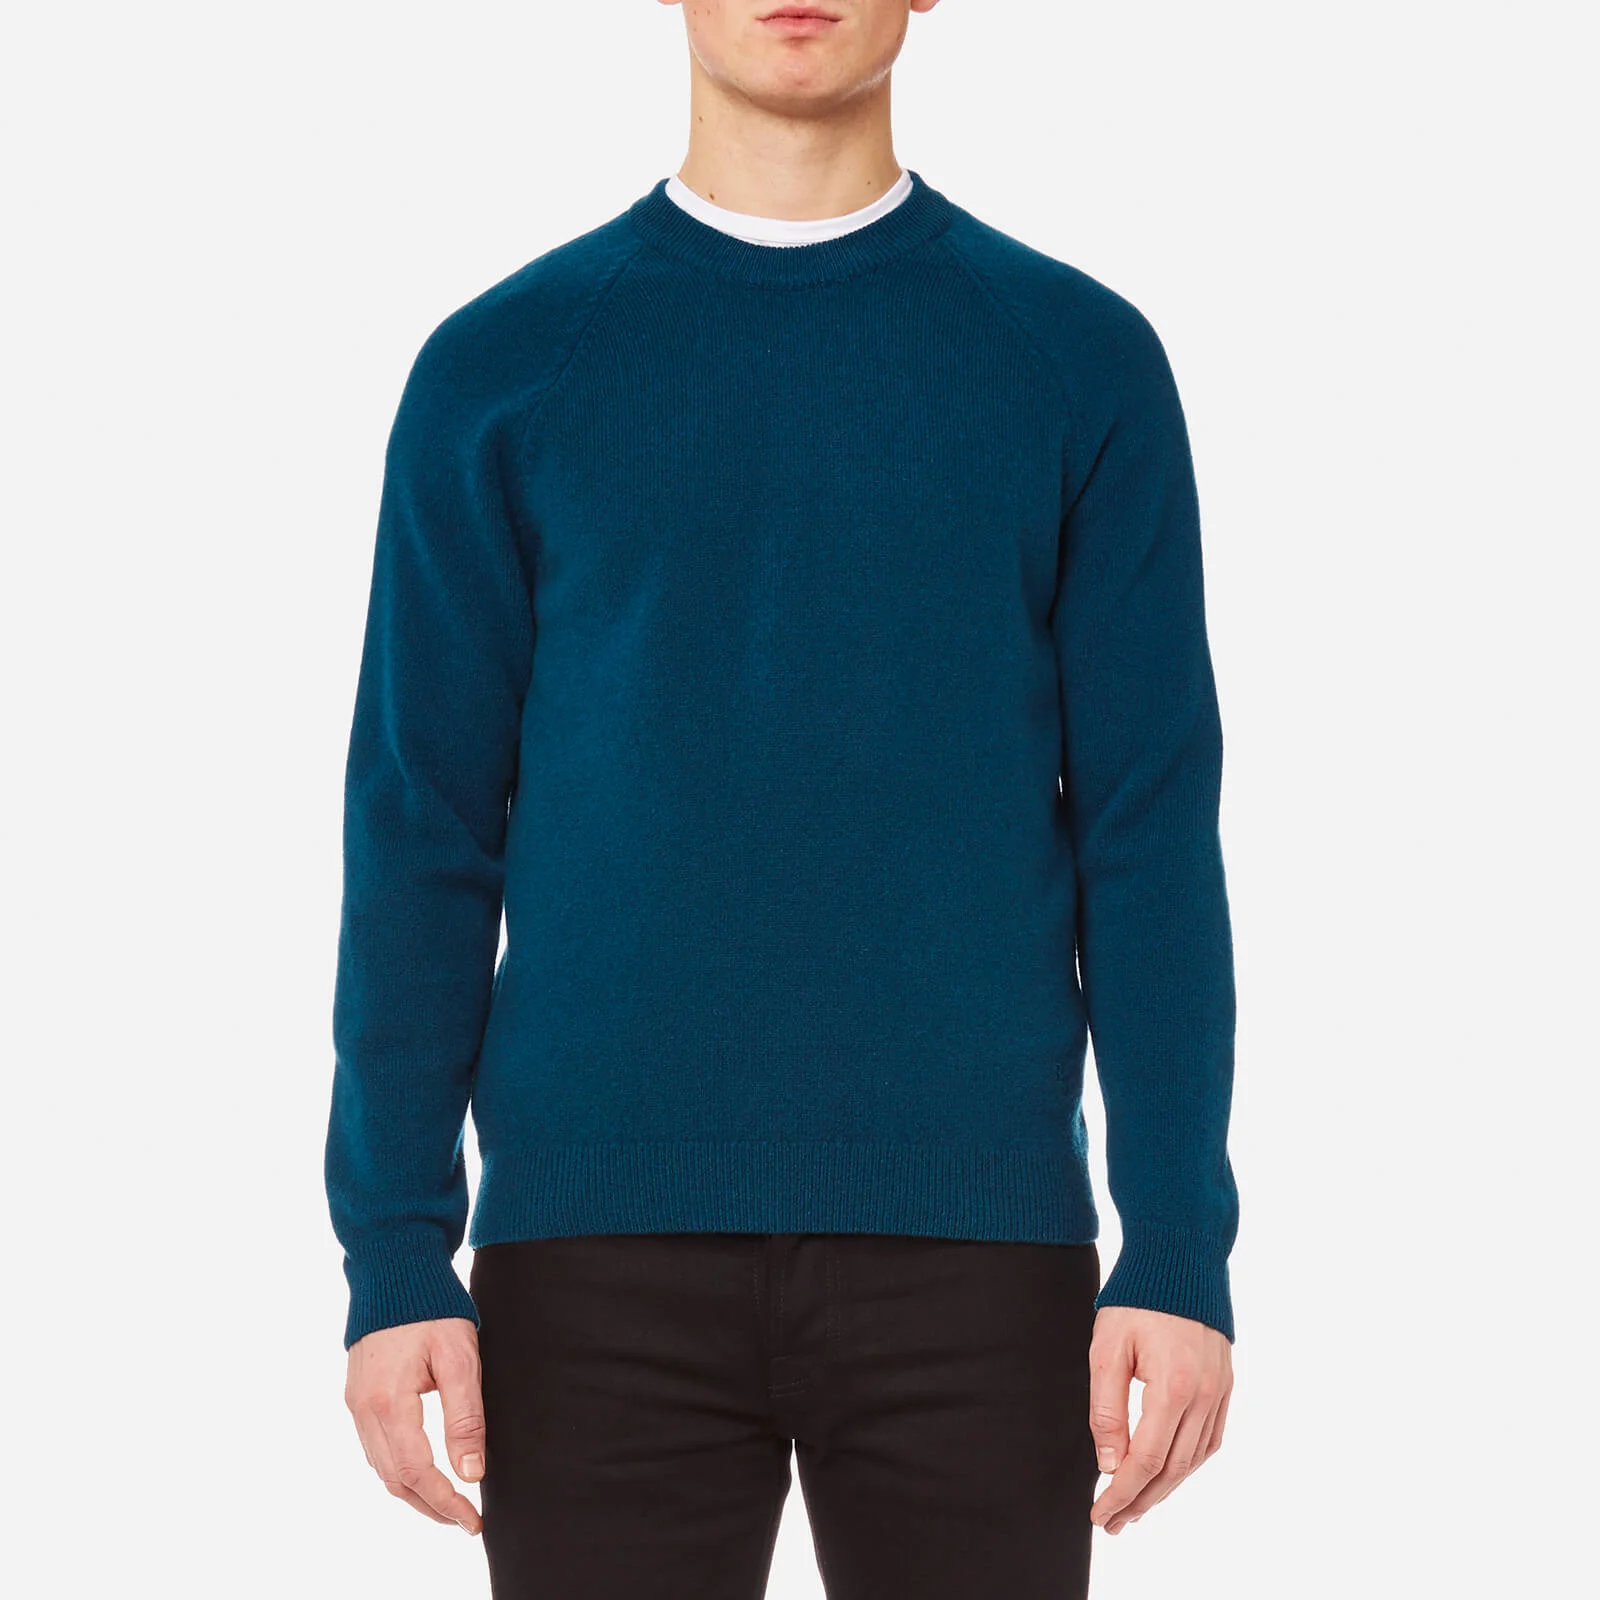 PS by Paul Smith Men's Heavy Merino Plain Knitted Jumper - Teal Image 1